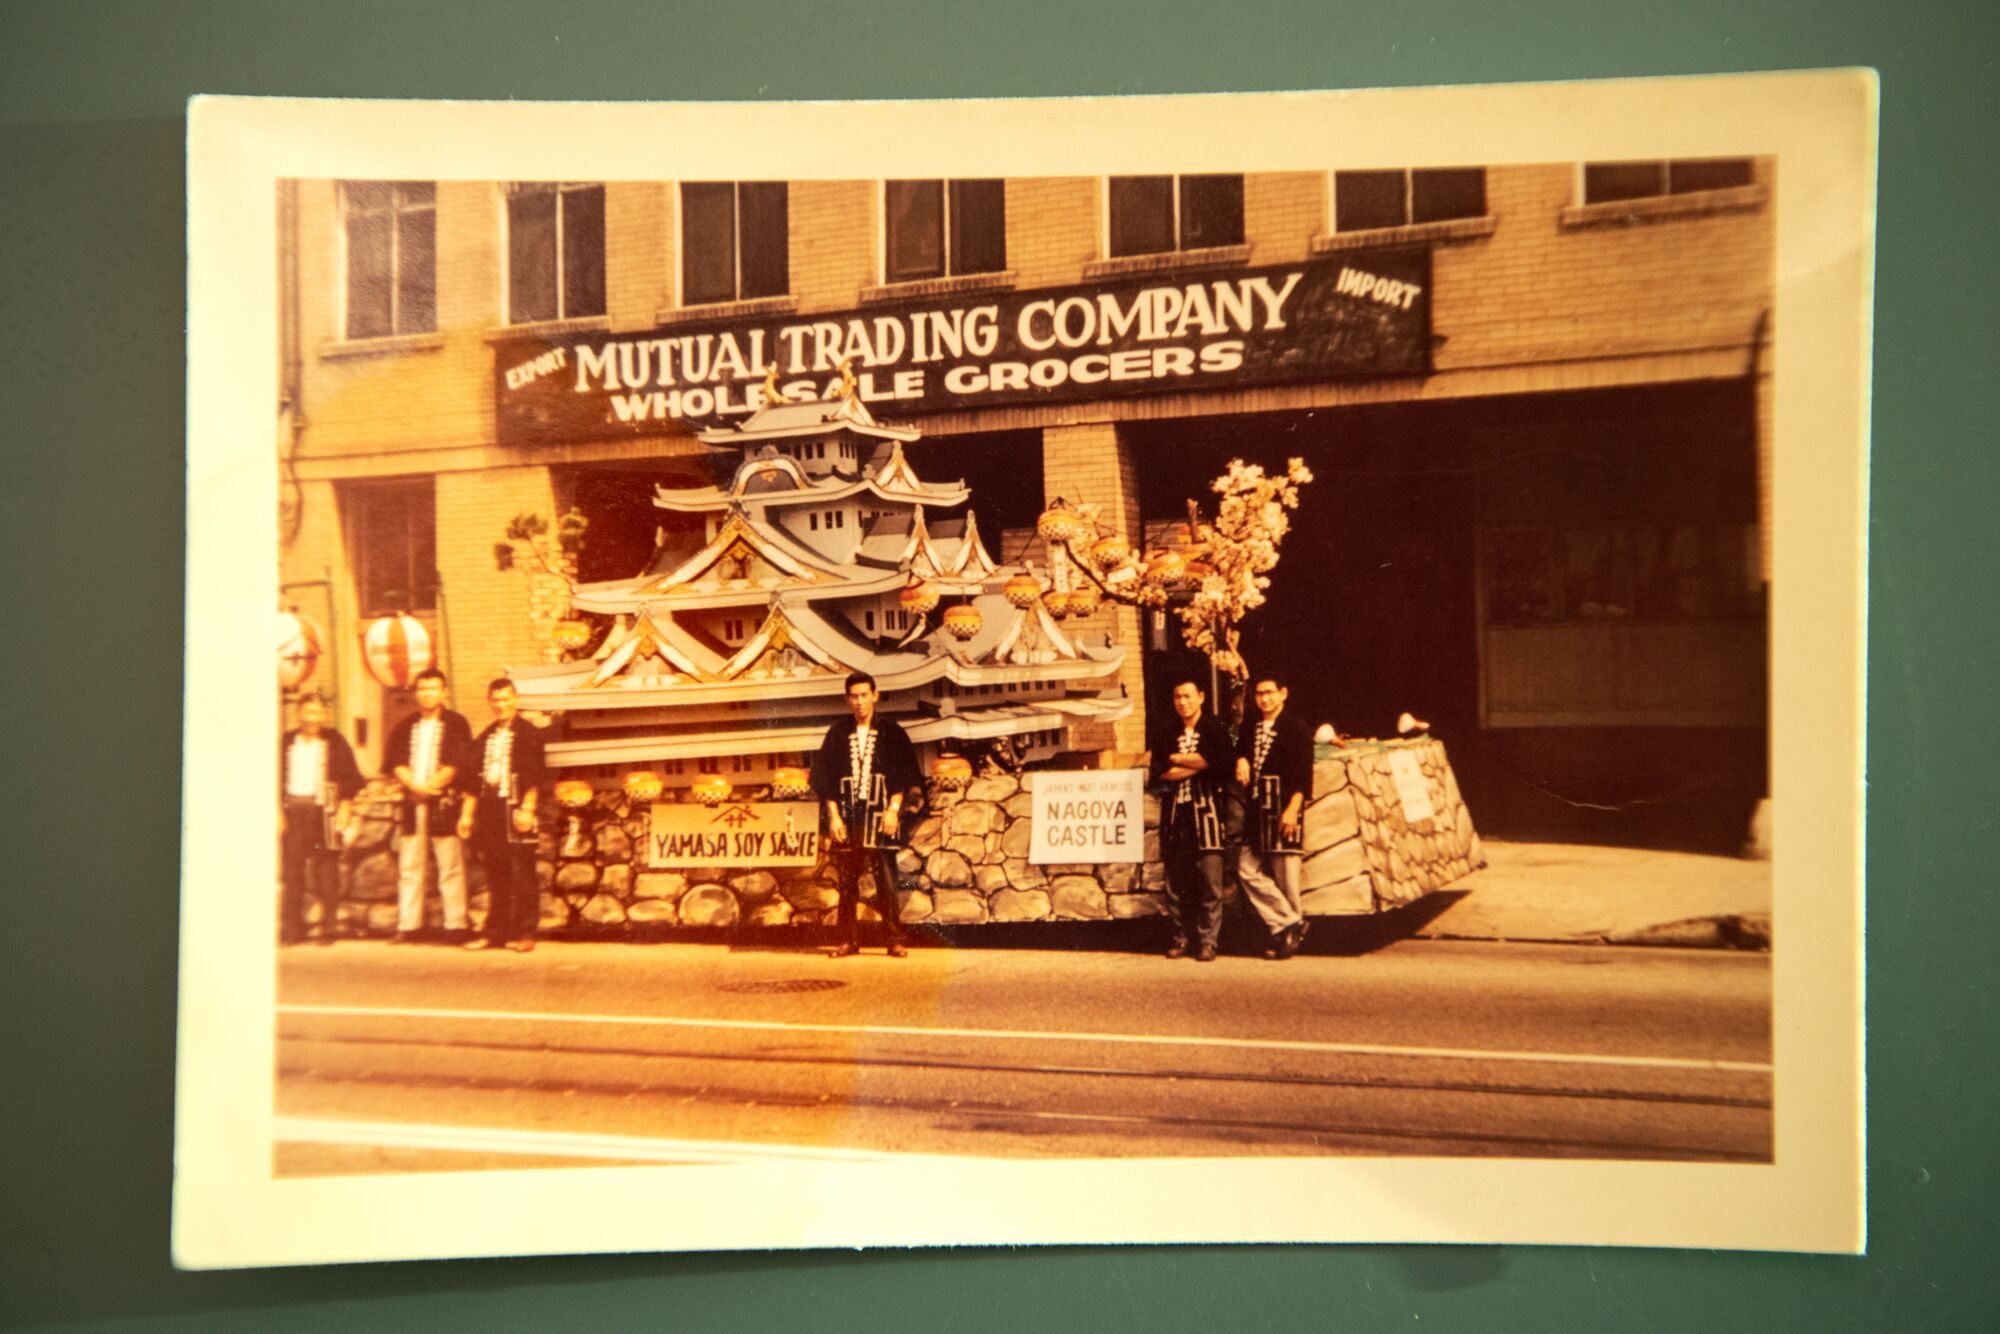 A vintage photograph of Mutual Trading Co.'s office near Little Tokyo.